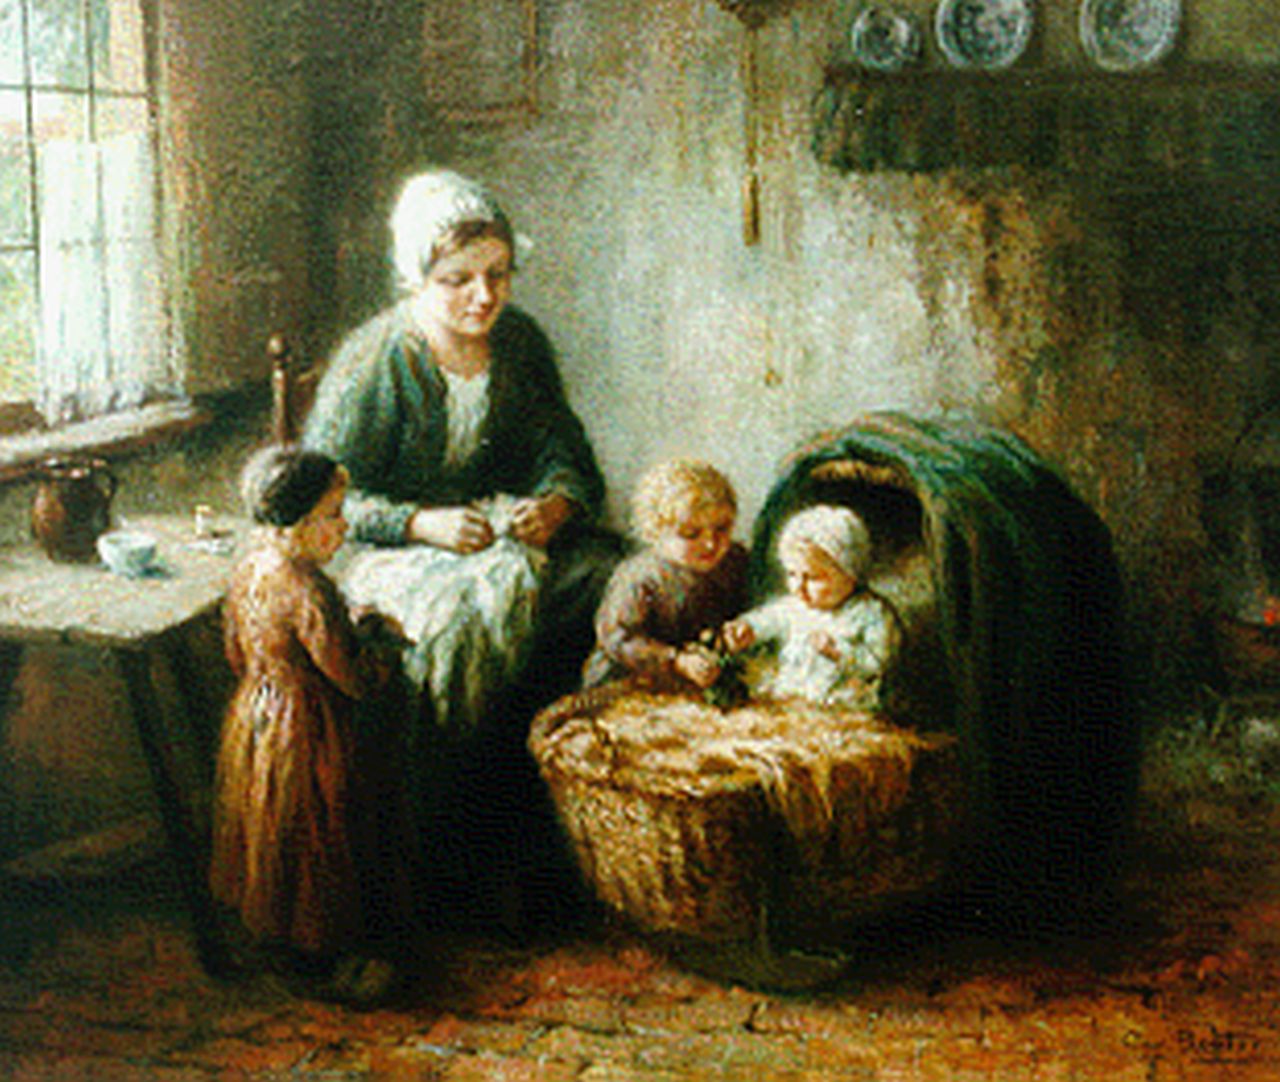 Bouter C.W.  | Cornelis Wouter 'Cor' Bouter, The new baby, Öl auf Leinwand 63,5 x 76,3 cm, signed l.r.